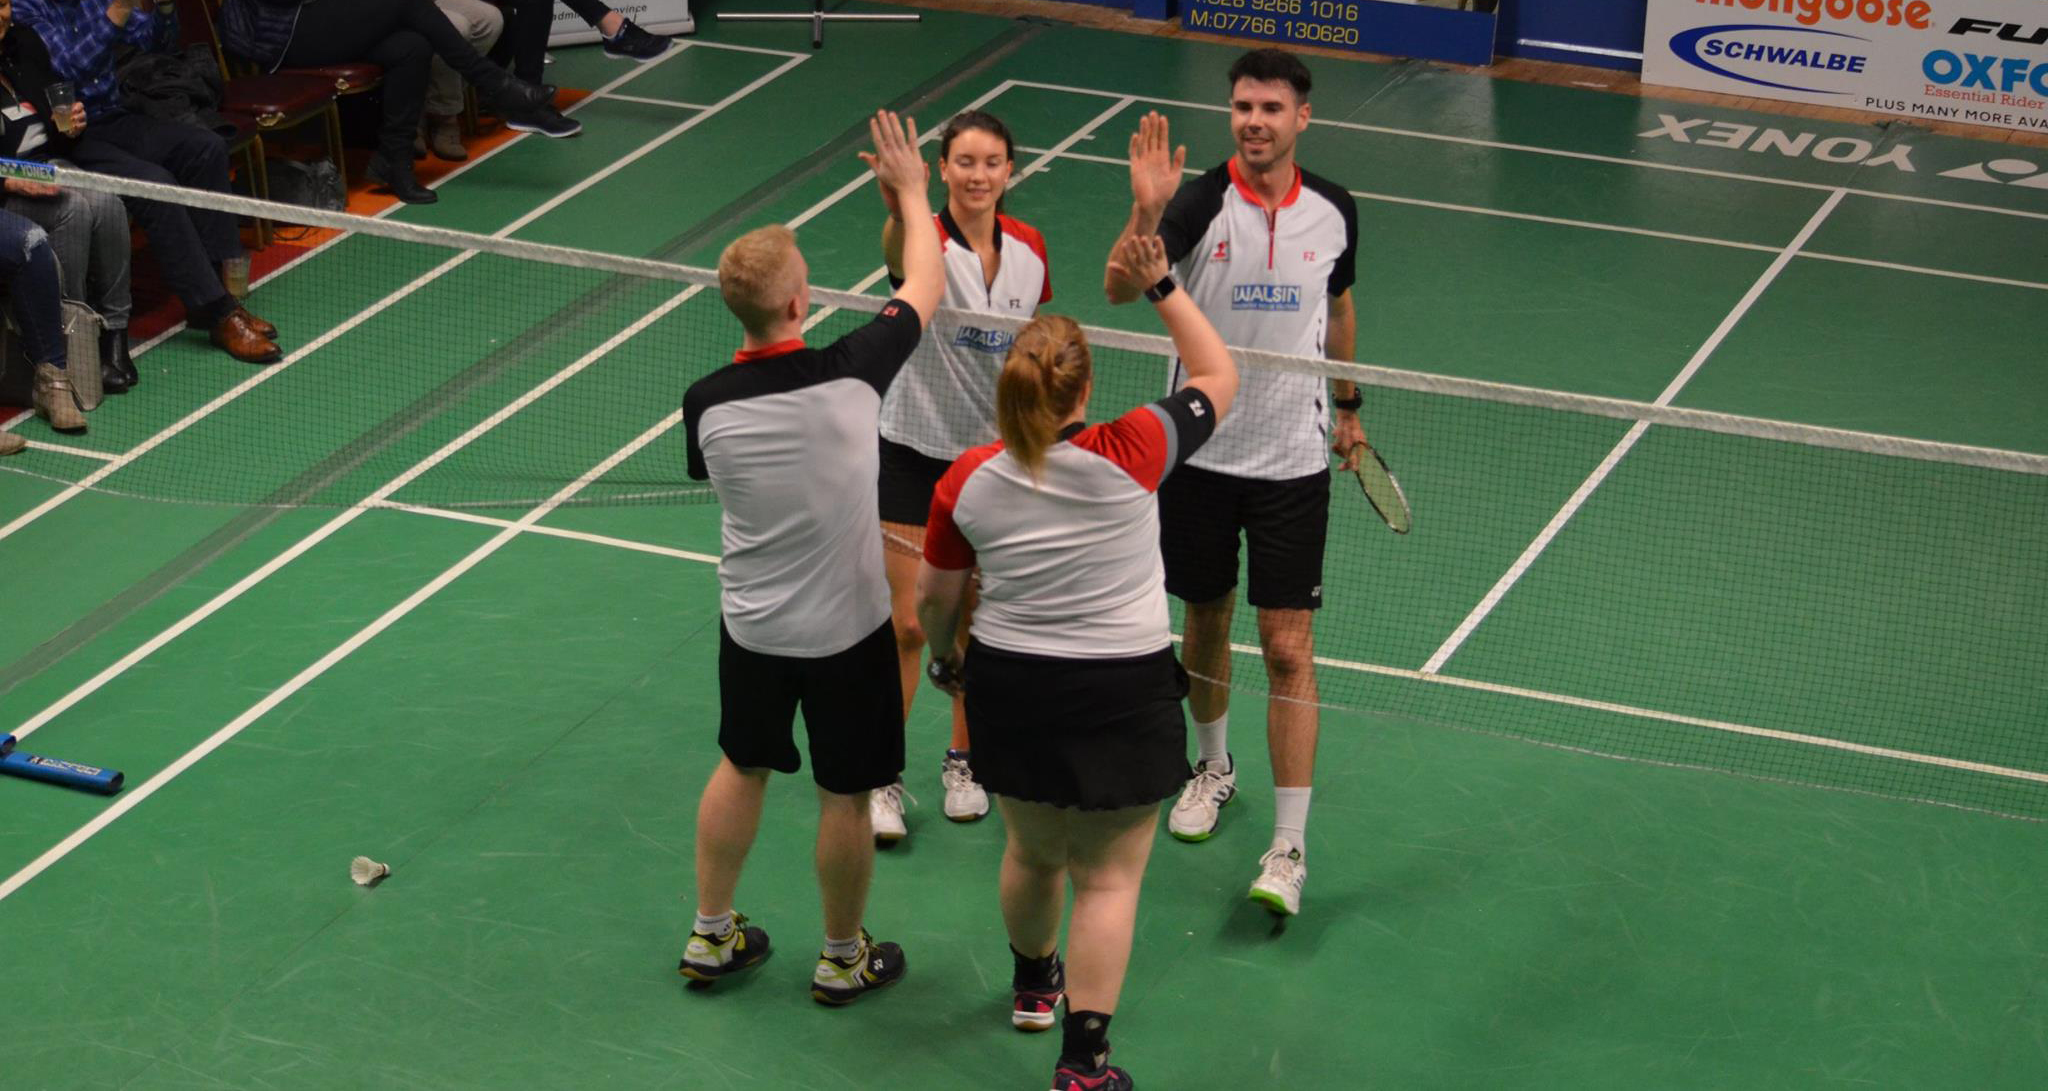 About Ulster Badminton